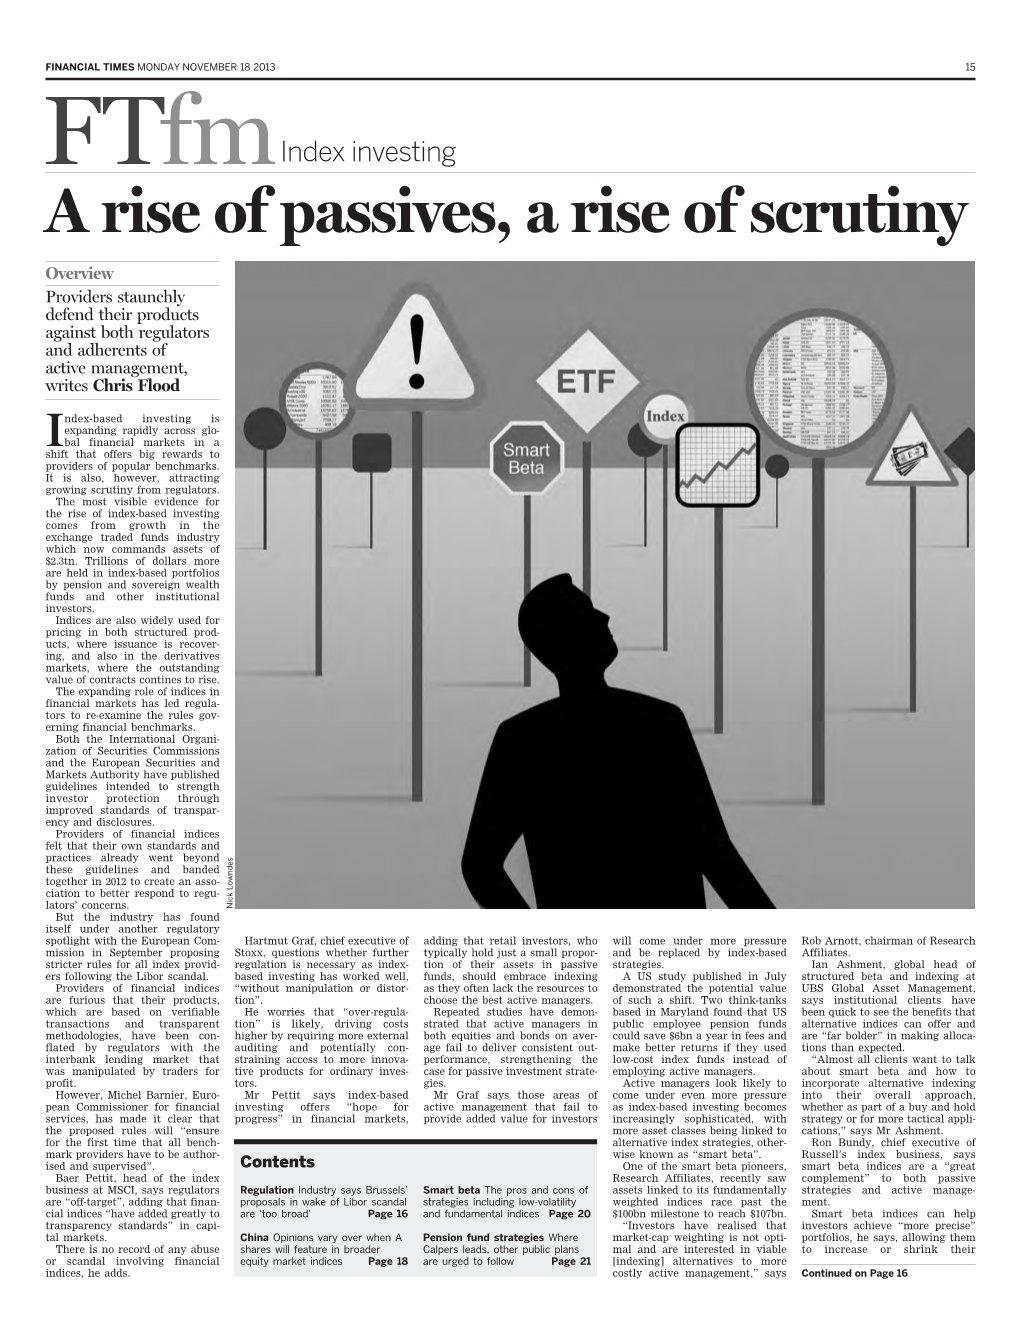 A Rise of Passives, a Rise of Scrutiny